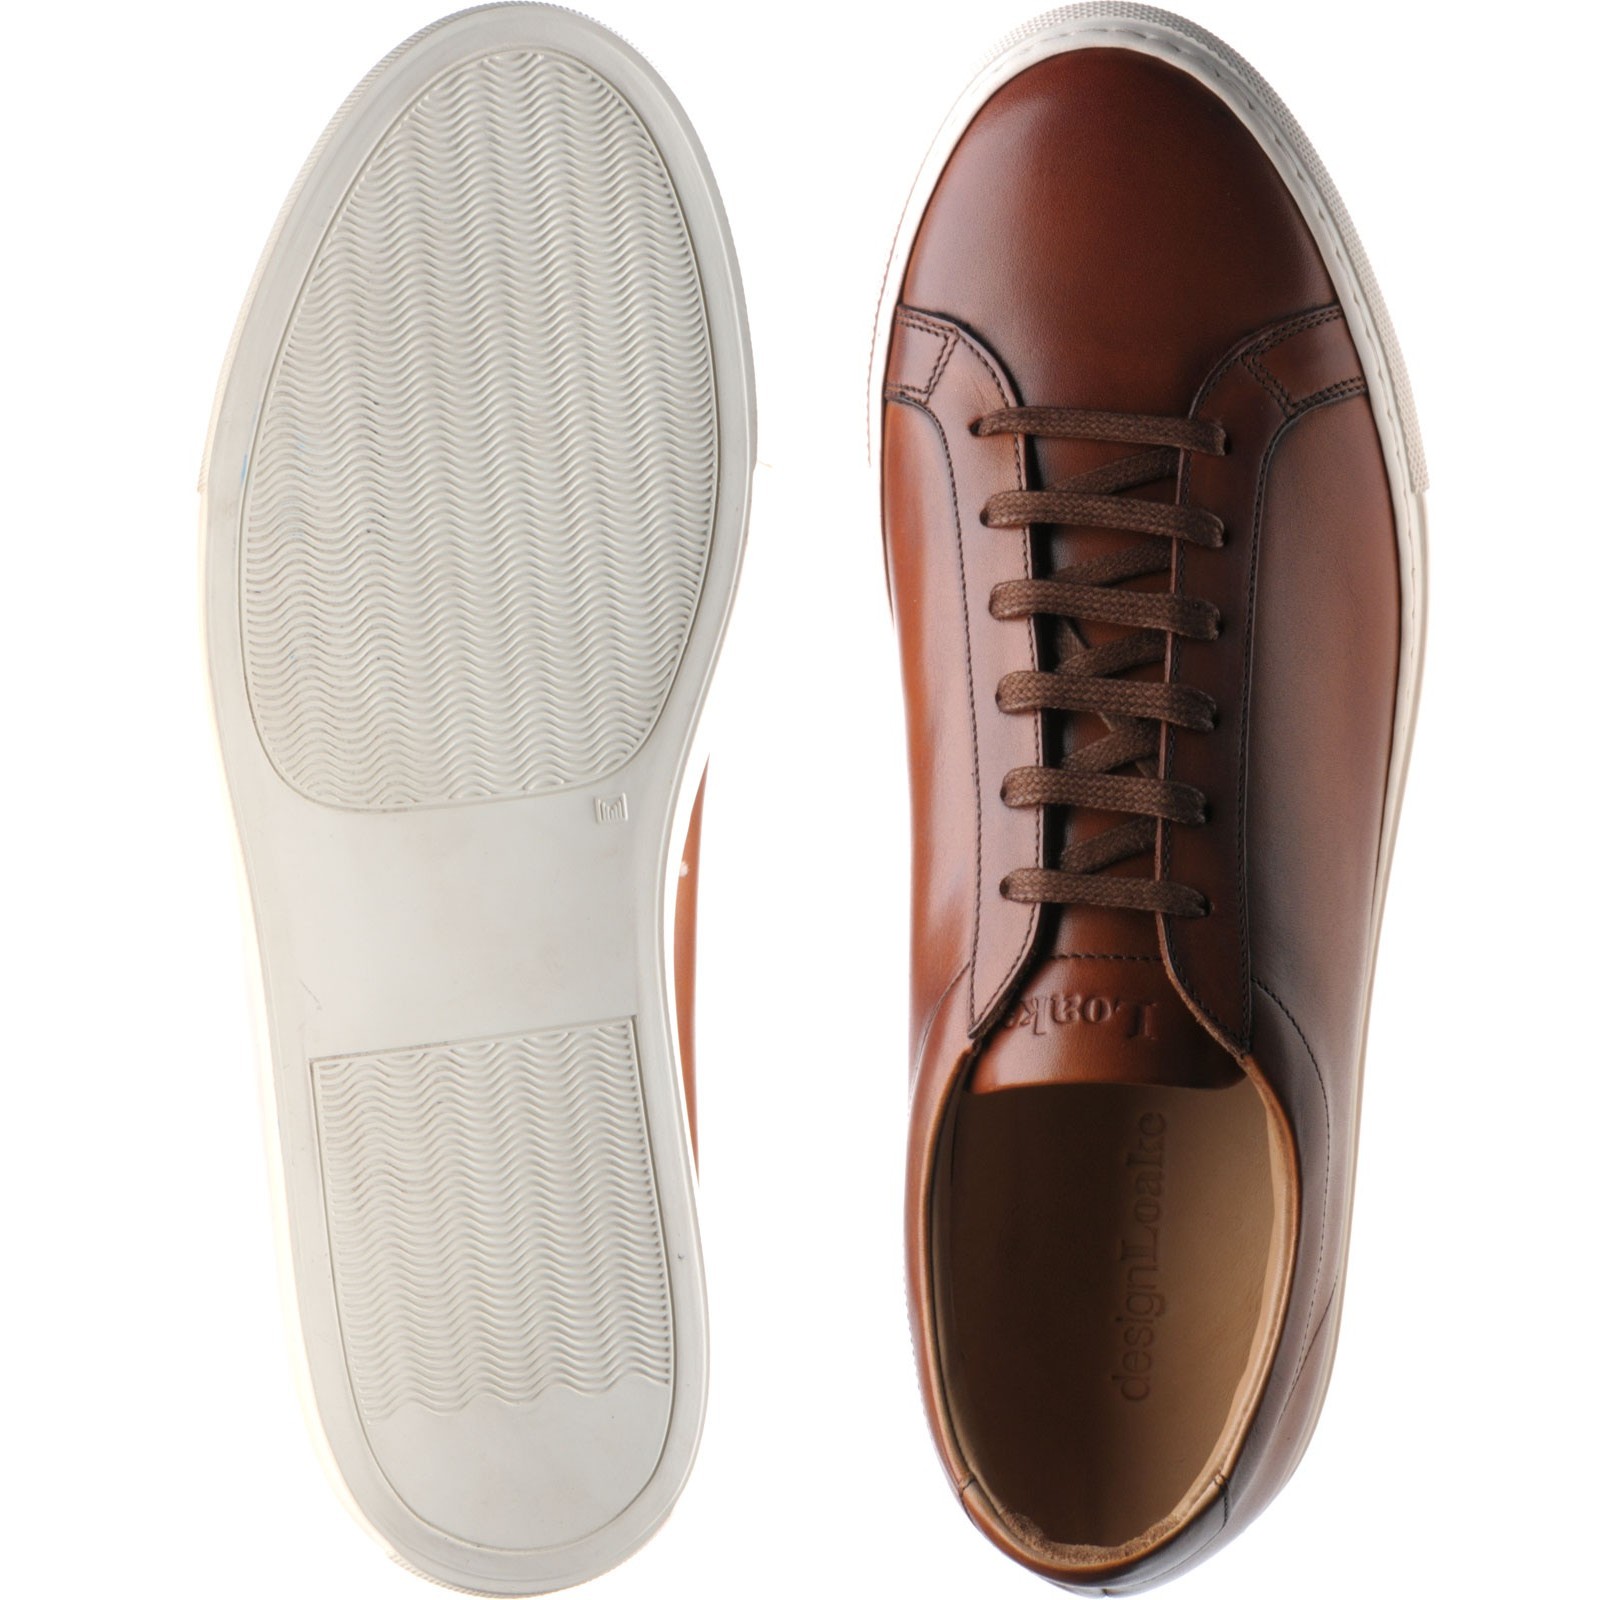 Loake shoes | Loake Lifestyle | Sprint in Deep Chestnut Calf at Herring ...